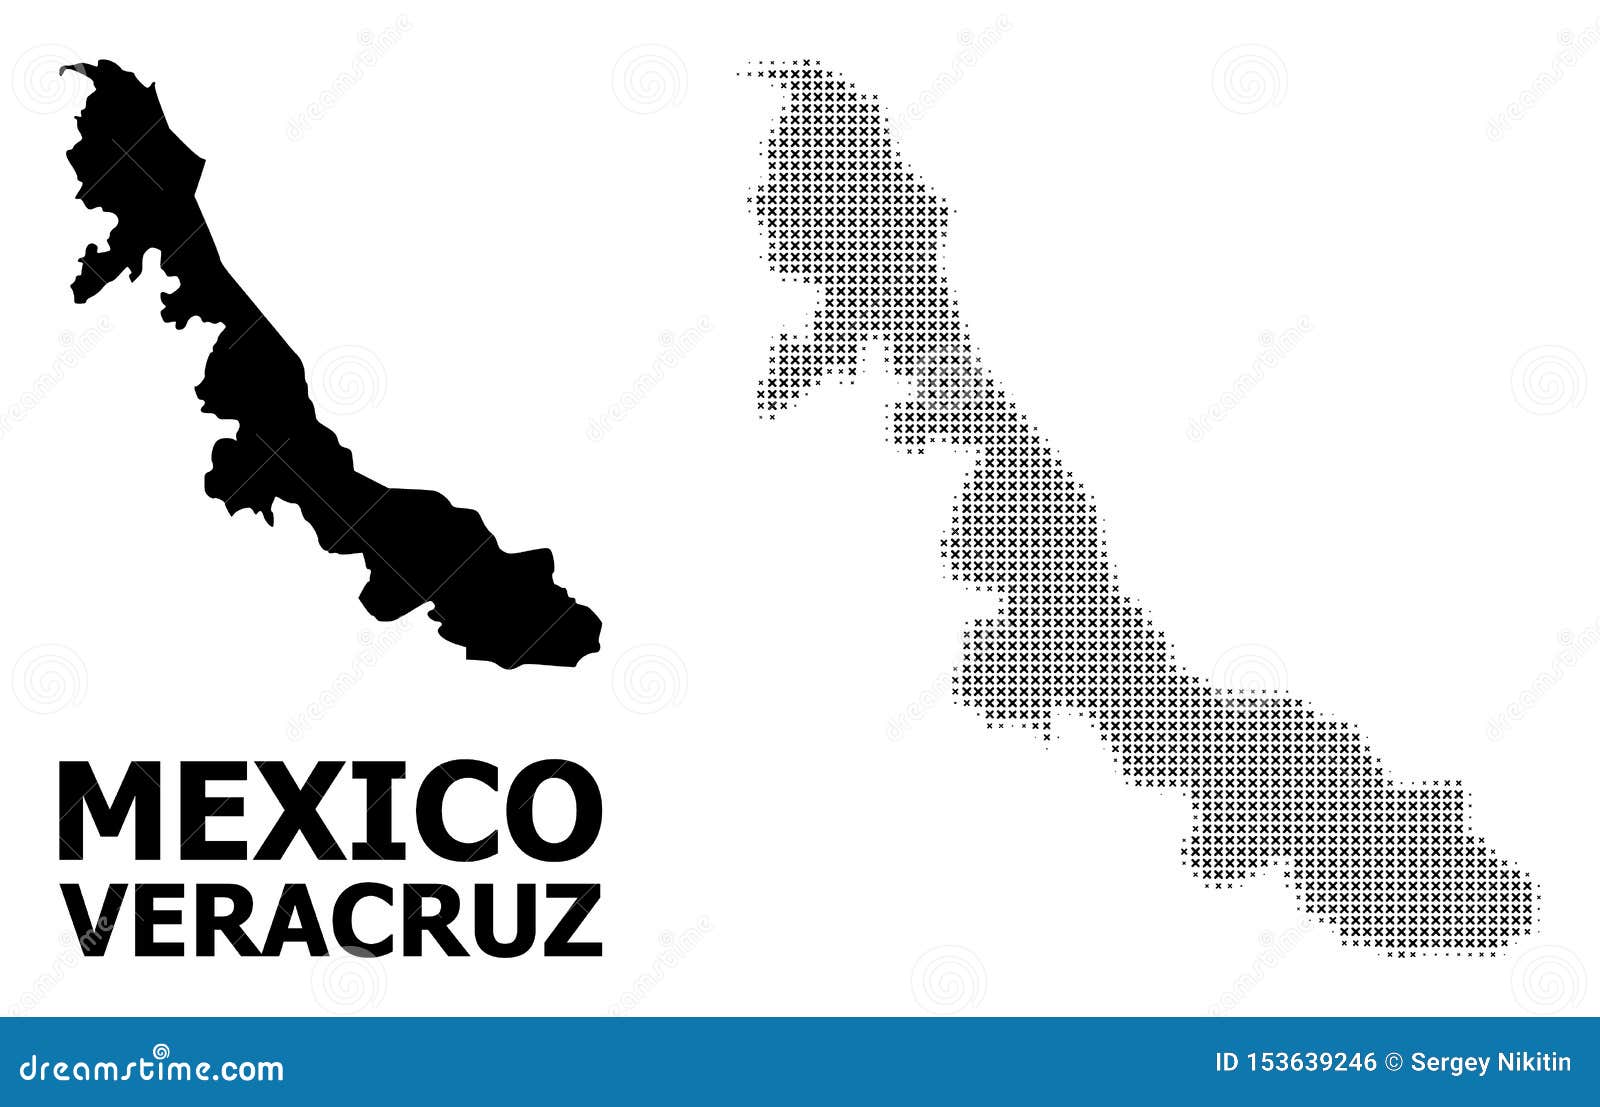  halftone pattern and solid map of veracruz state